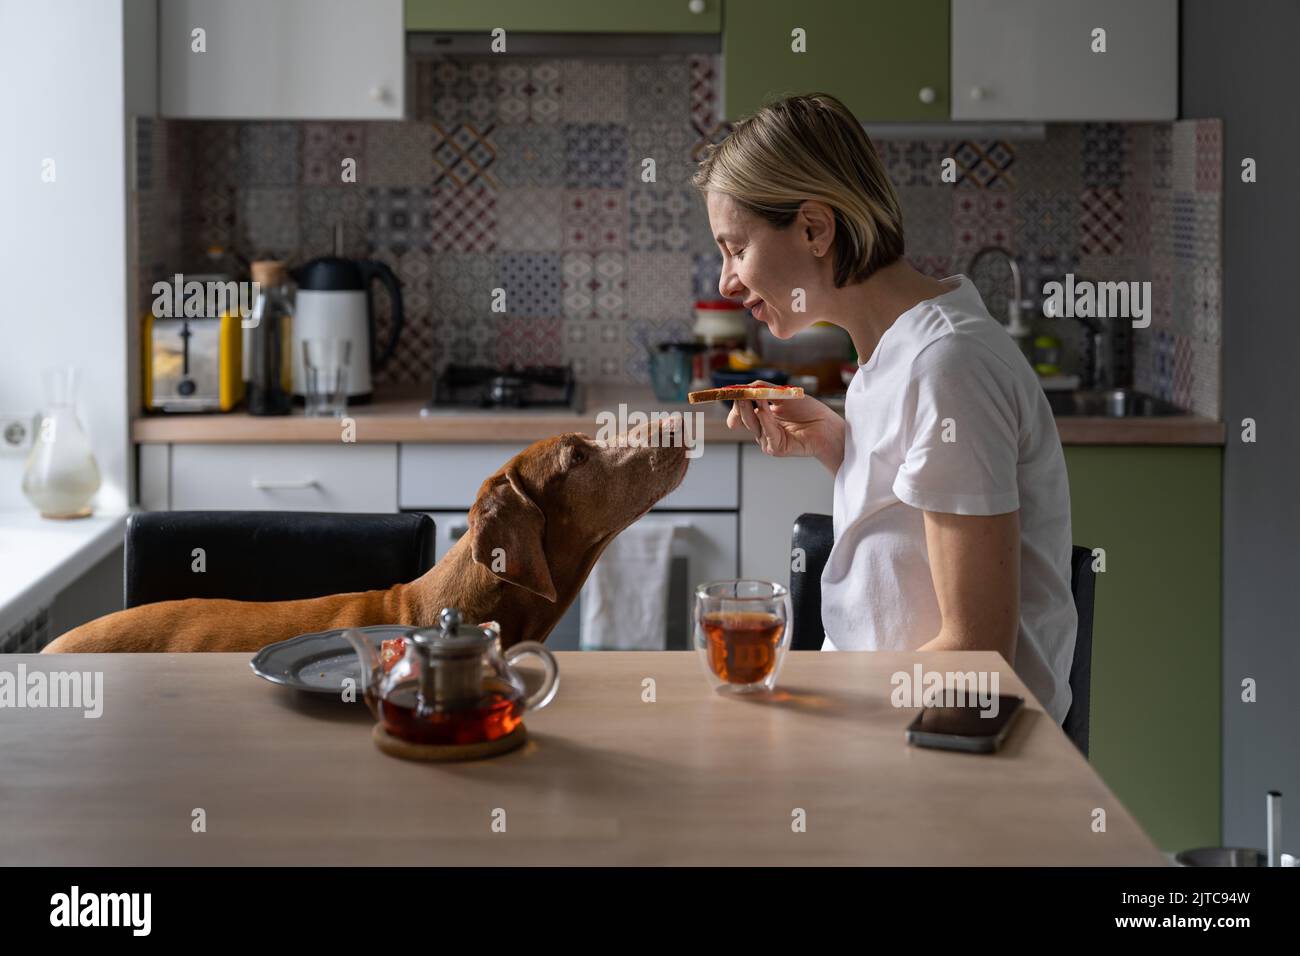 Middle-aged woman eats sandwich with jam and teases favourite Vizsla dog in kitchen Stock Photo